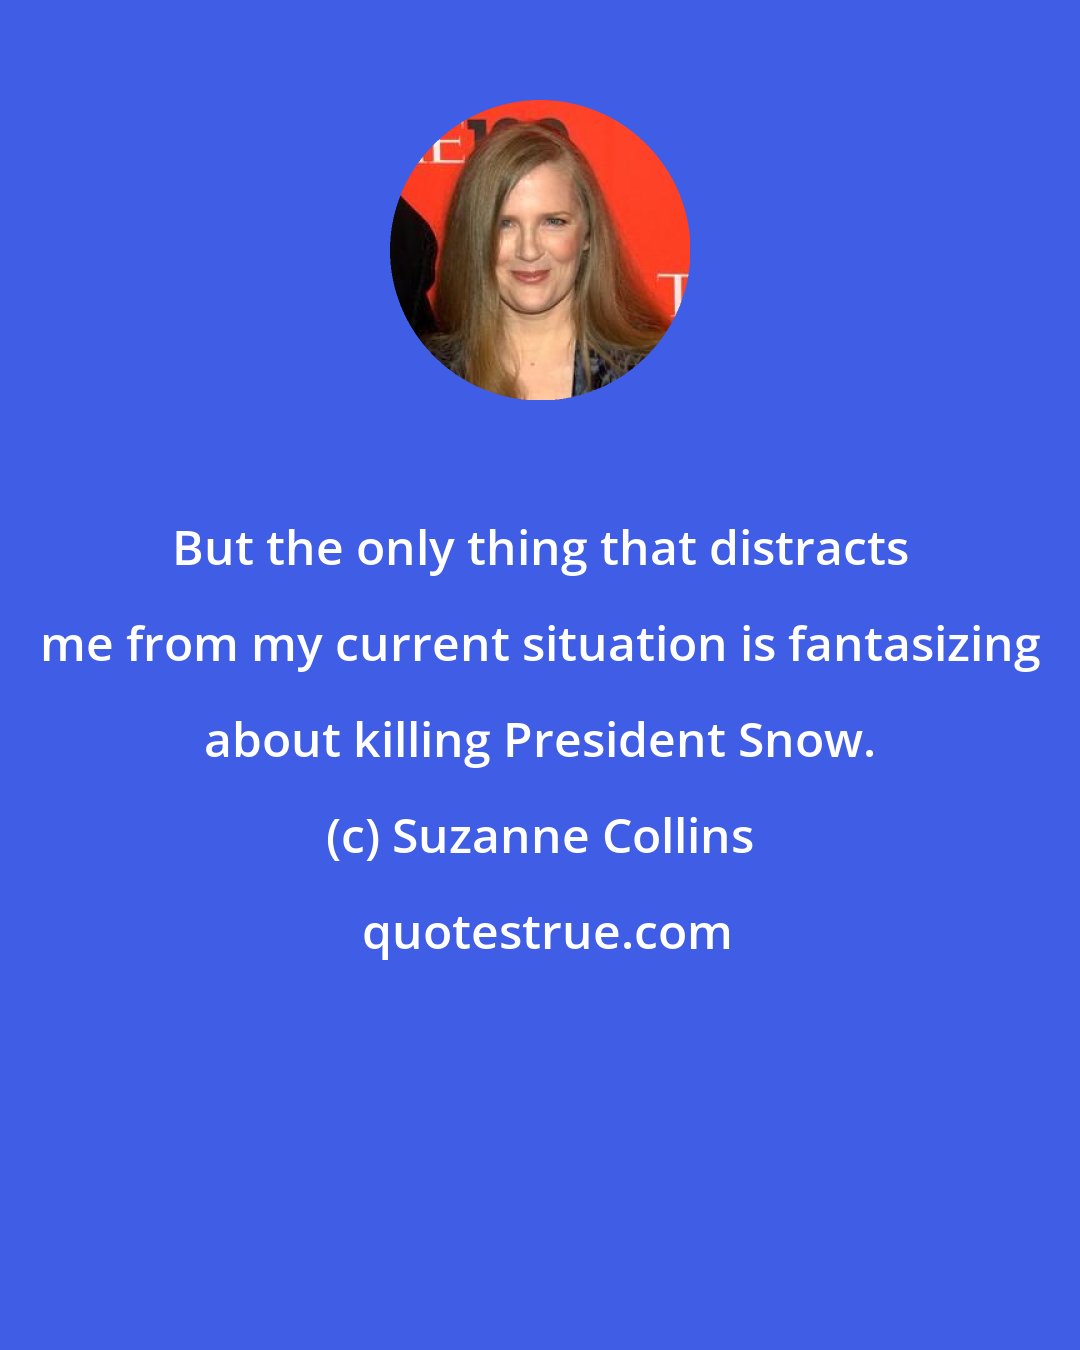 Suzanne Collins: But the only thing that distracts me from my current situation is fantasizing about killing President Snow.